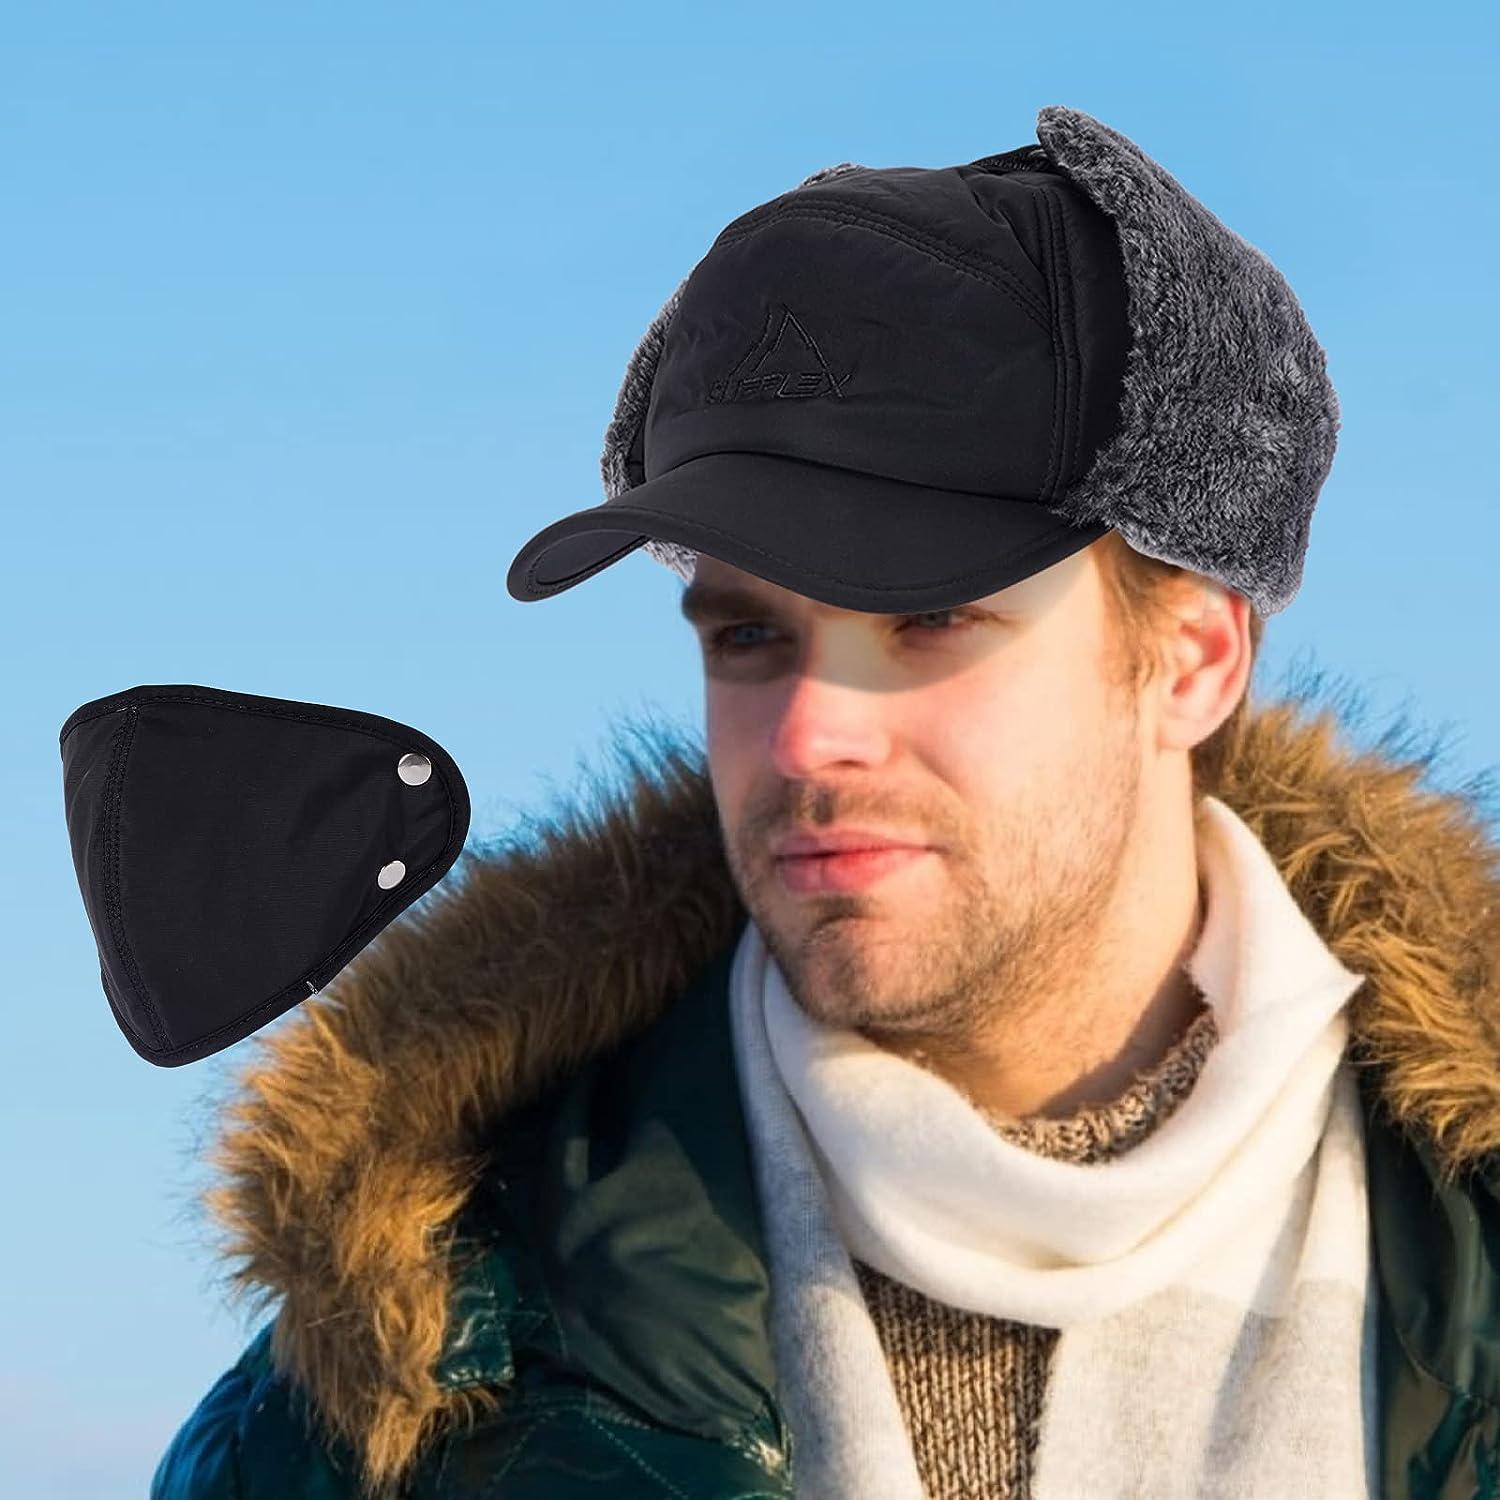 Outbound Unisex Insulated Fur Winter Aviator Trapper Ear Flaps Hat  Water-Resistant, Black